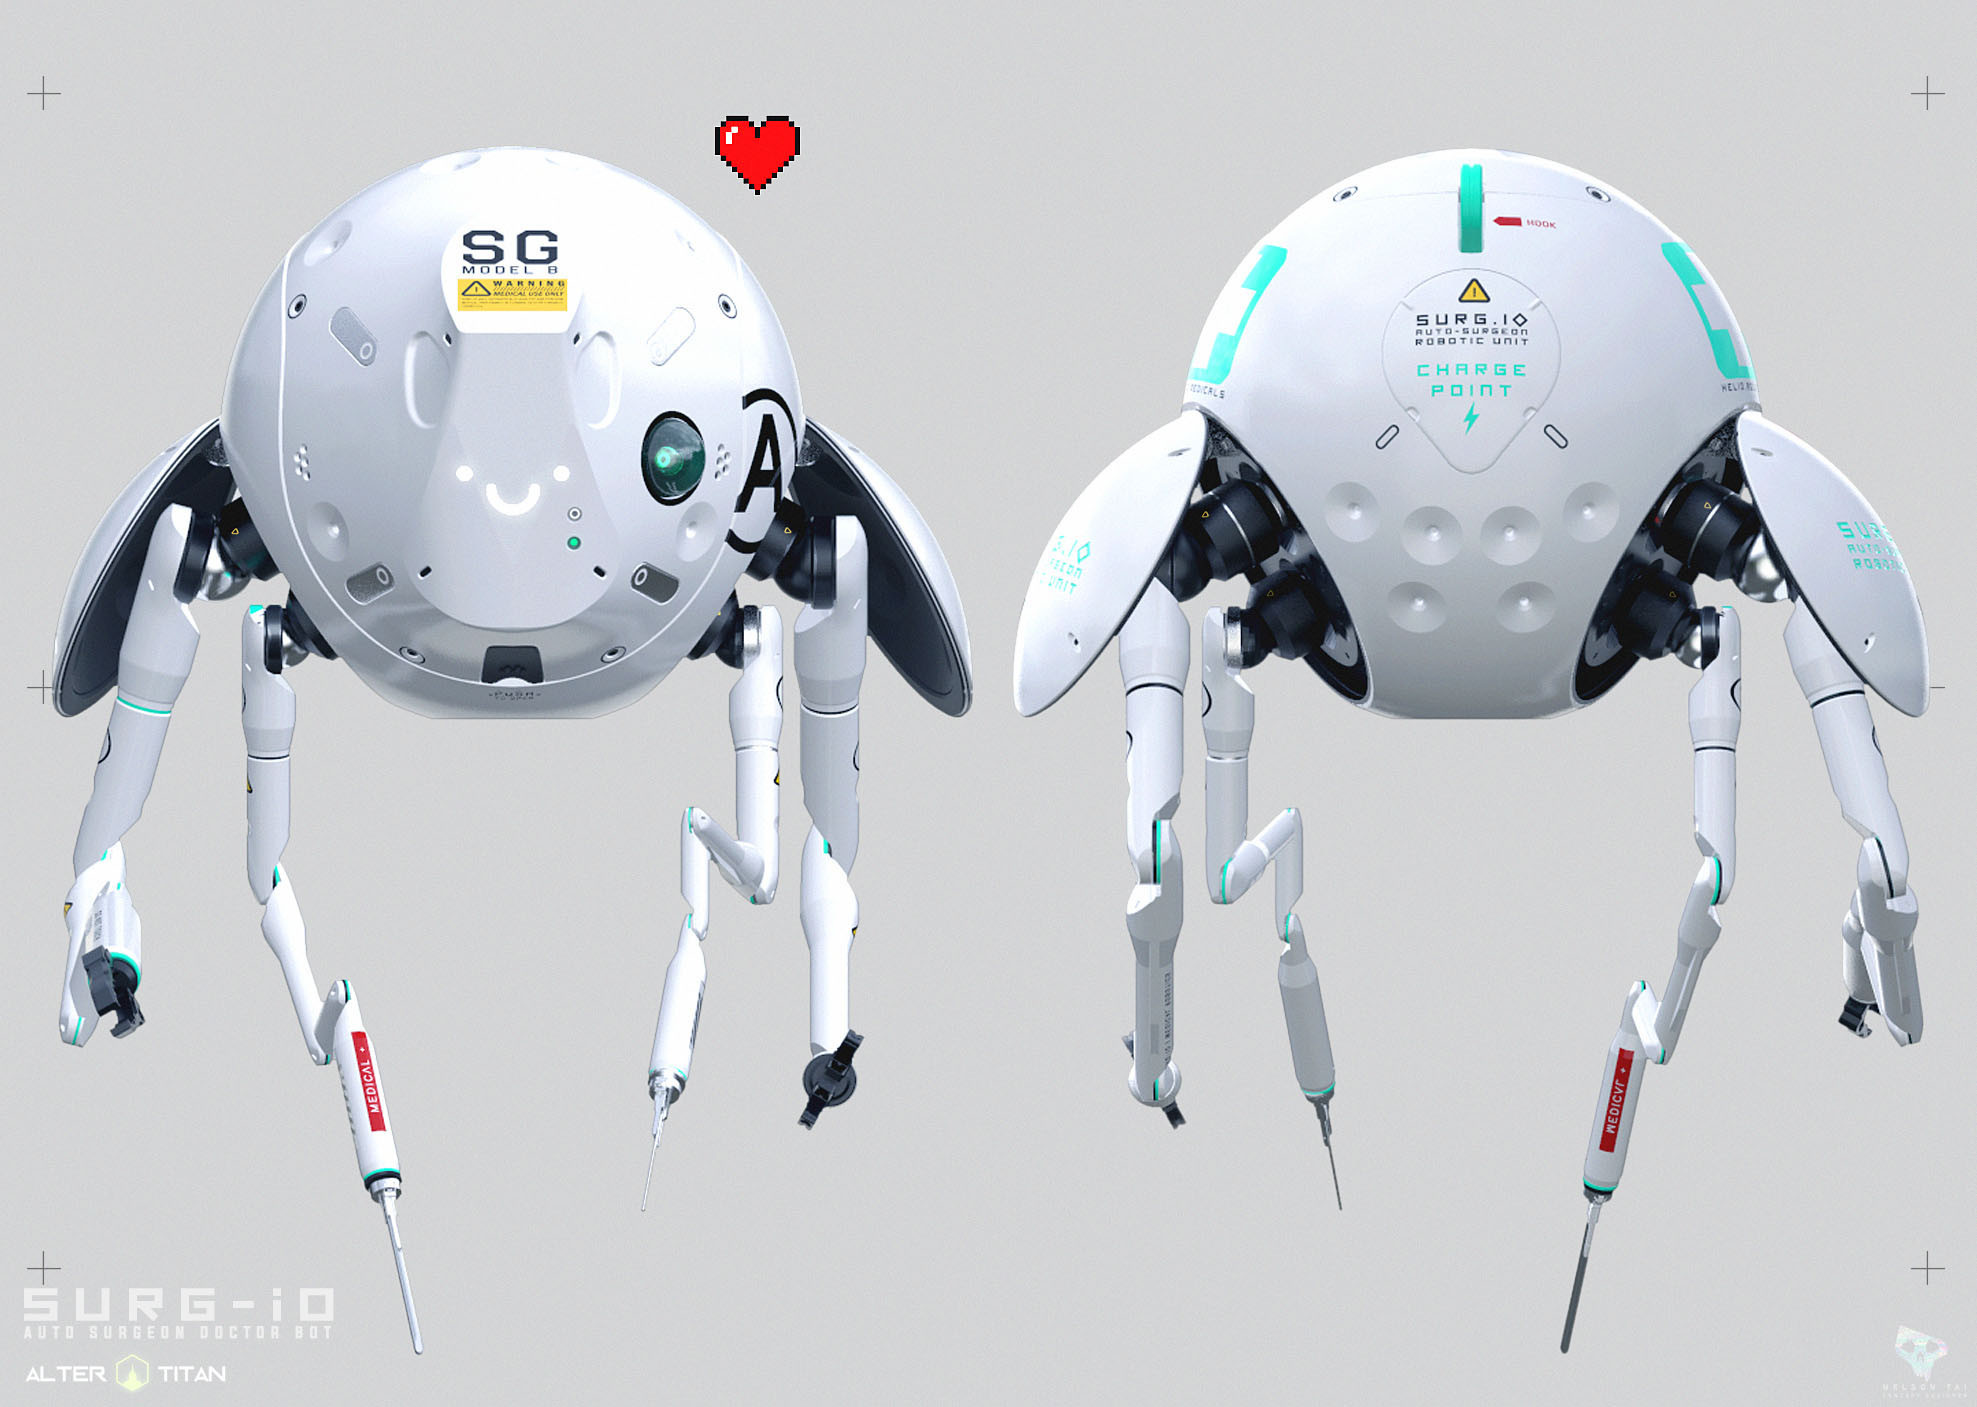 Meet SURG-IO! Your personal medic assistant!